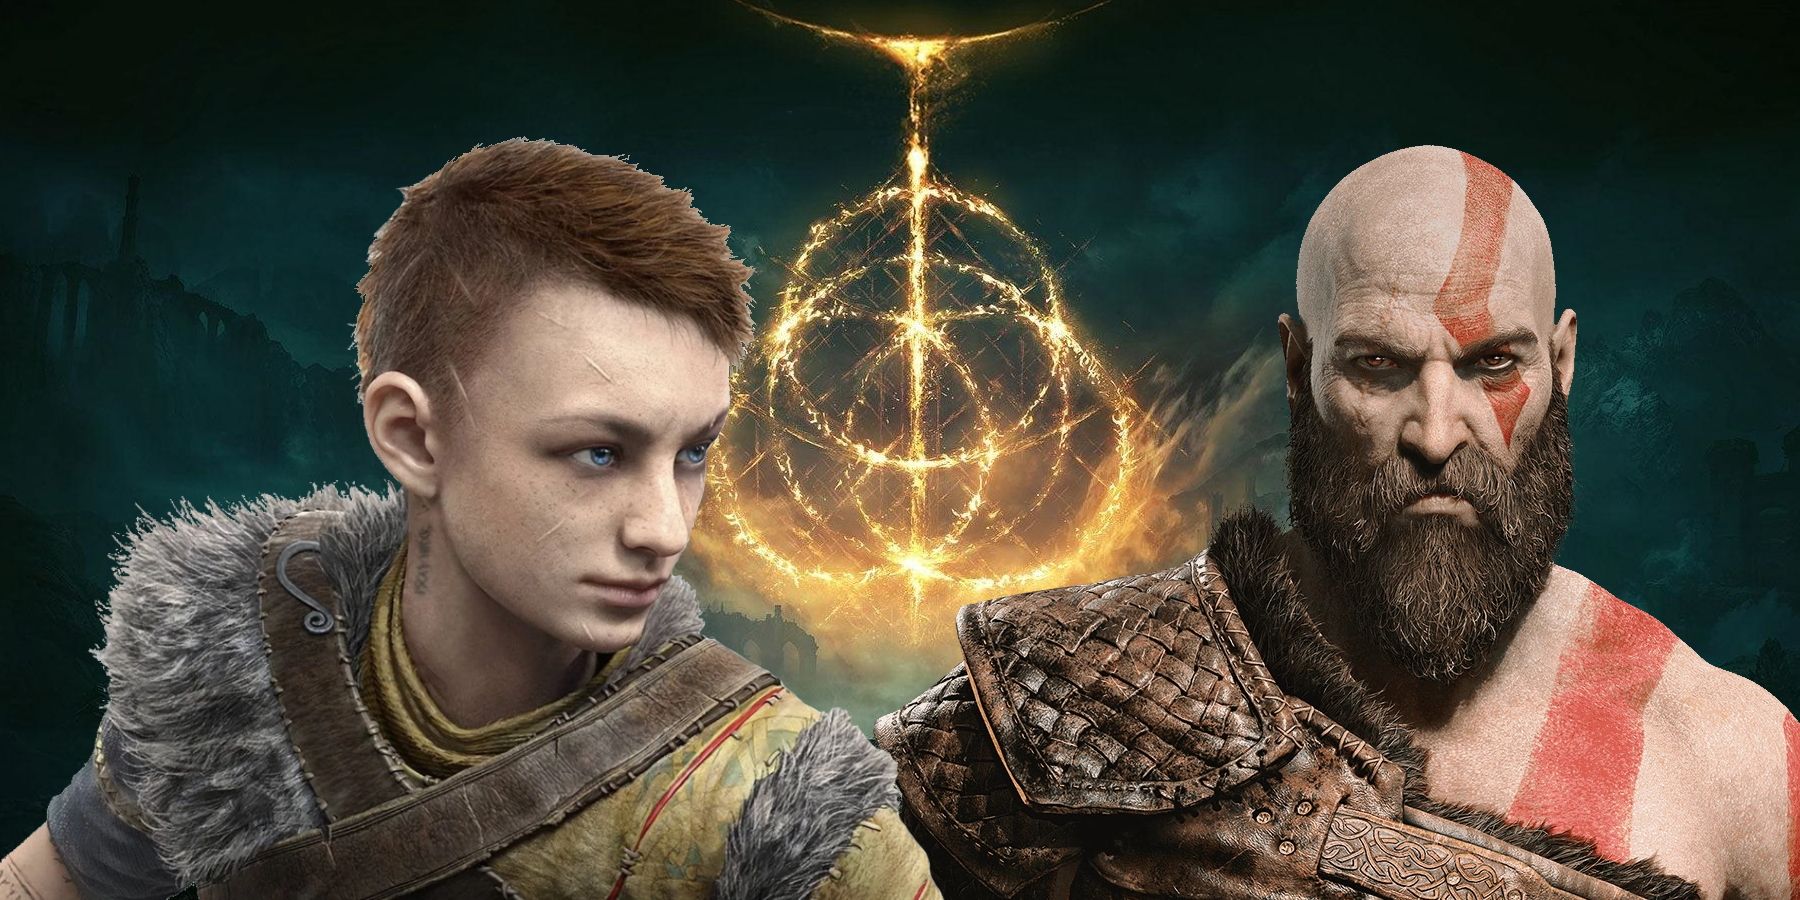 Atreus and Kratos, from the God of War franchise, in front of the Elden Ring.